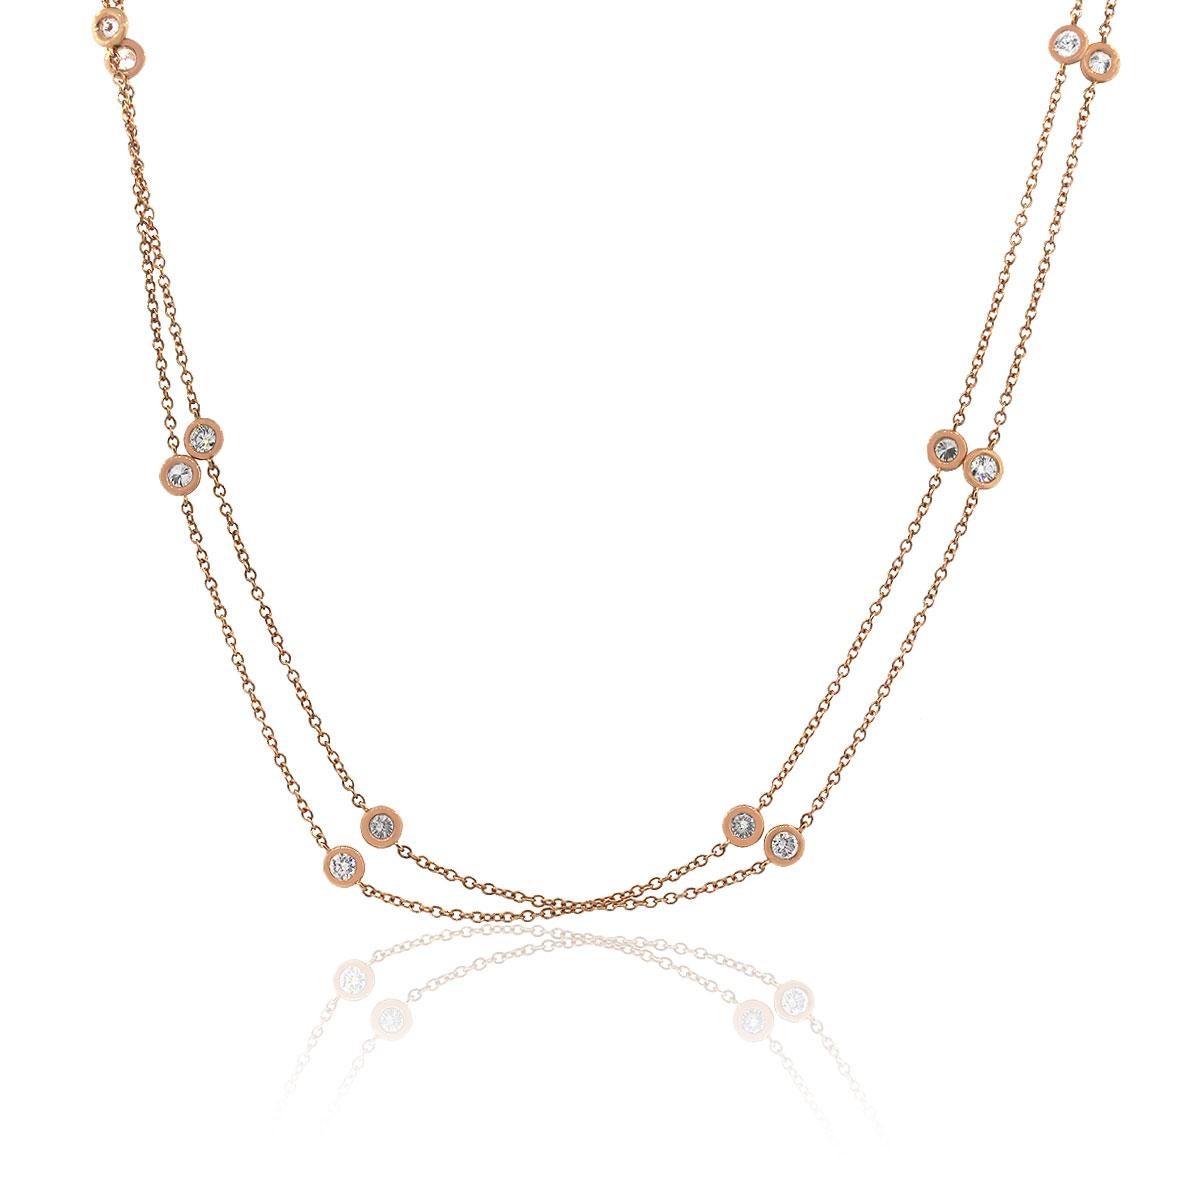 Material: 18k Rose Gold
Diamond Details: Approximately 4ctw of round brilliant diamonds. Diamonds are G-H in color and VS in clarity
Necklace Measurements: 70″
Clasp: Lobster Claw Clasp
Total Weight: 15.5g (10dwt)
SKU: A30311877